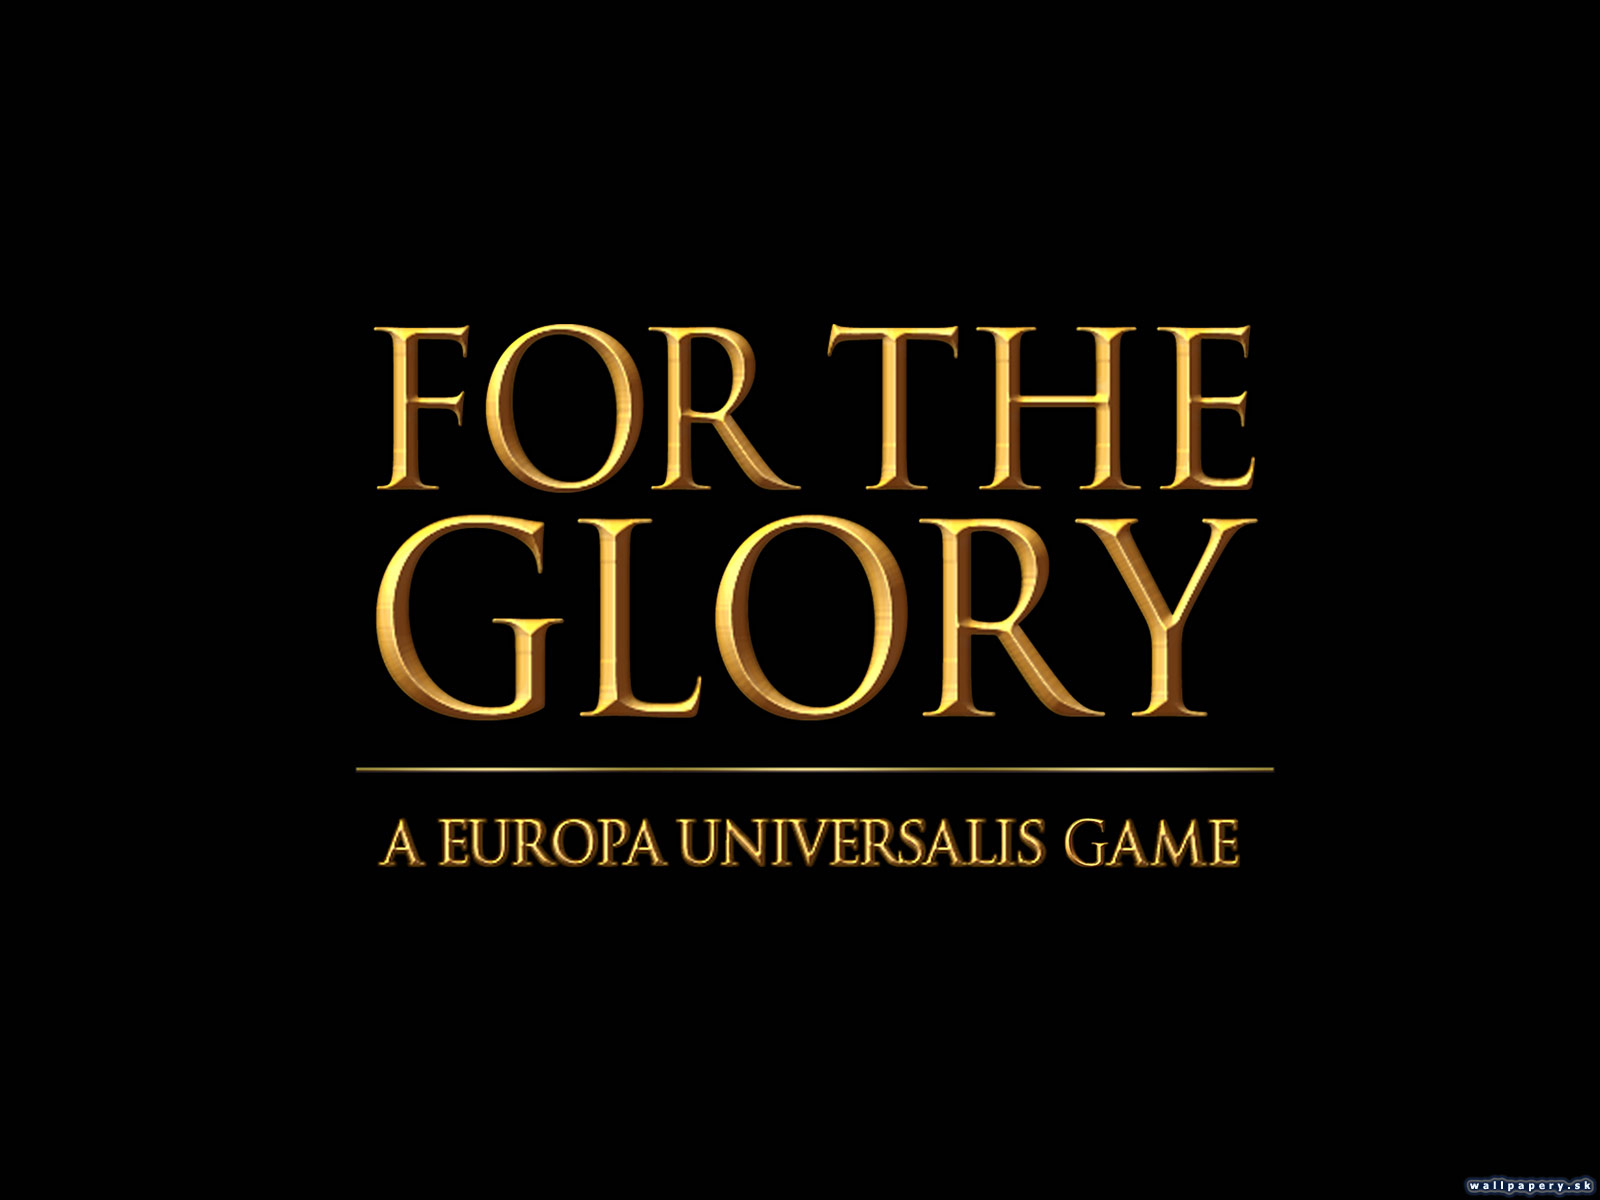 For The Glory: A Europa Universalis Game - wallpaper 3